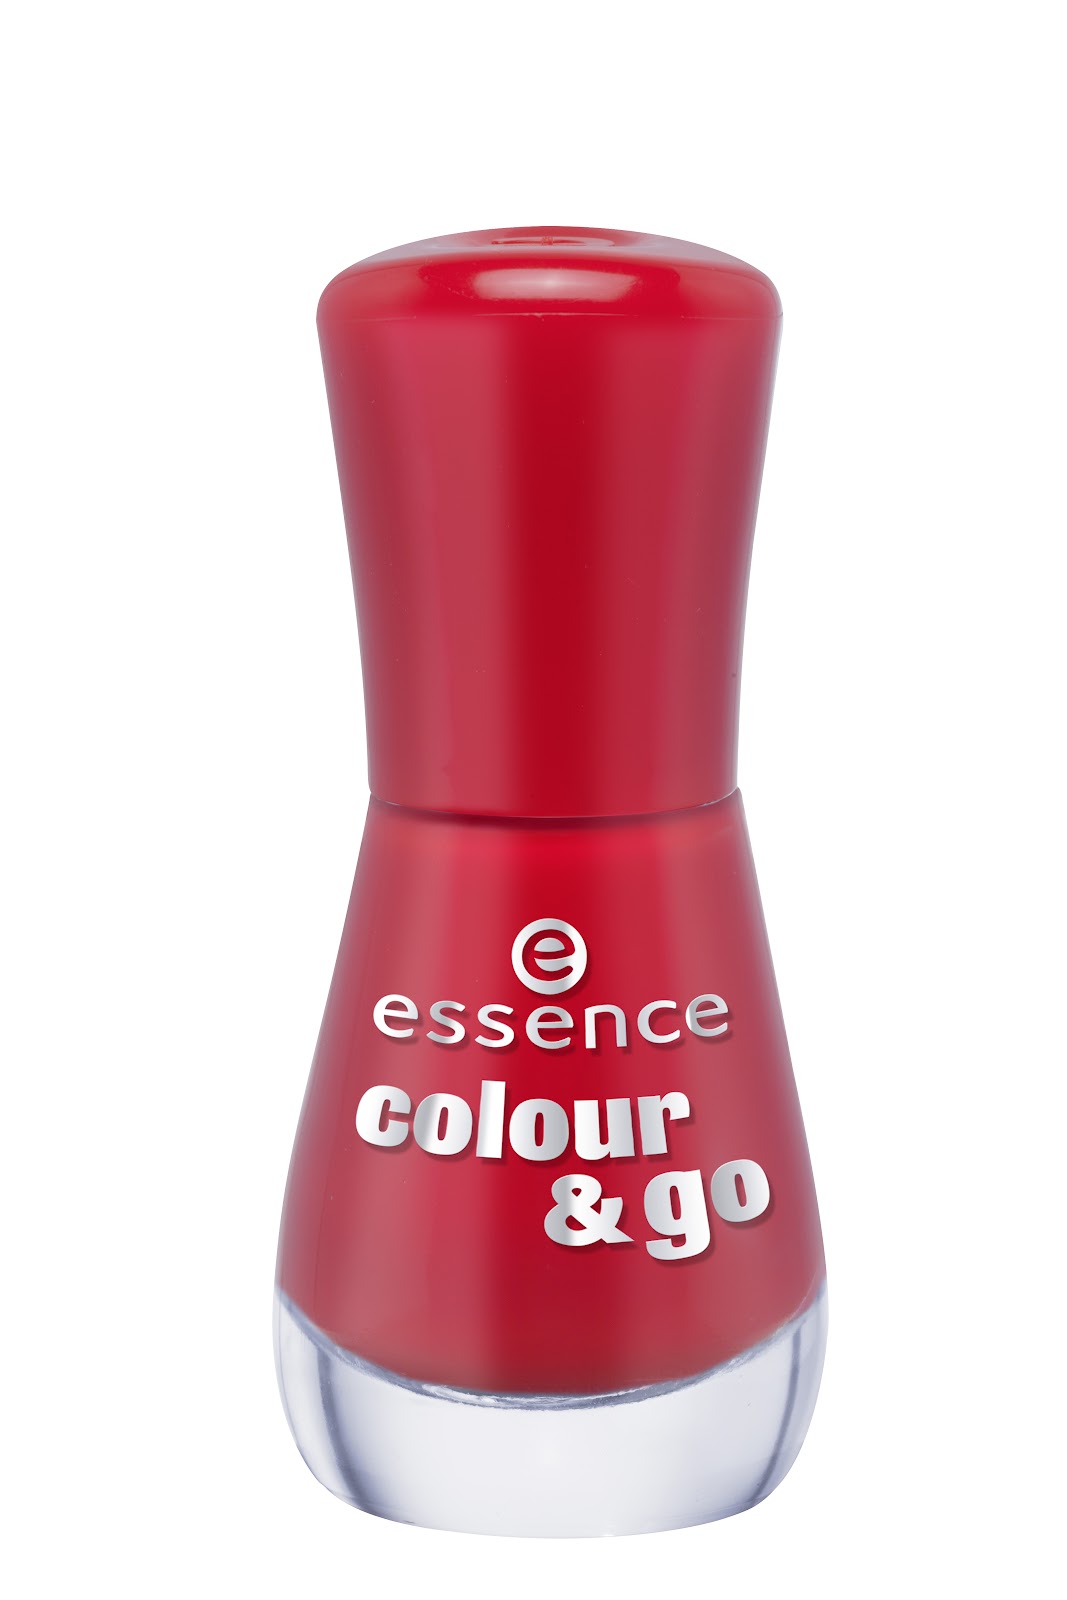 Essence are always great for there budget nail polishes, Available from